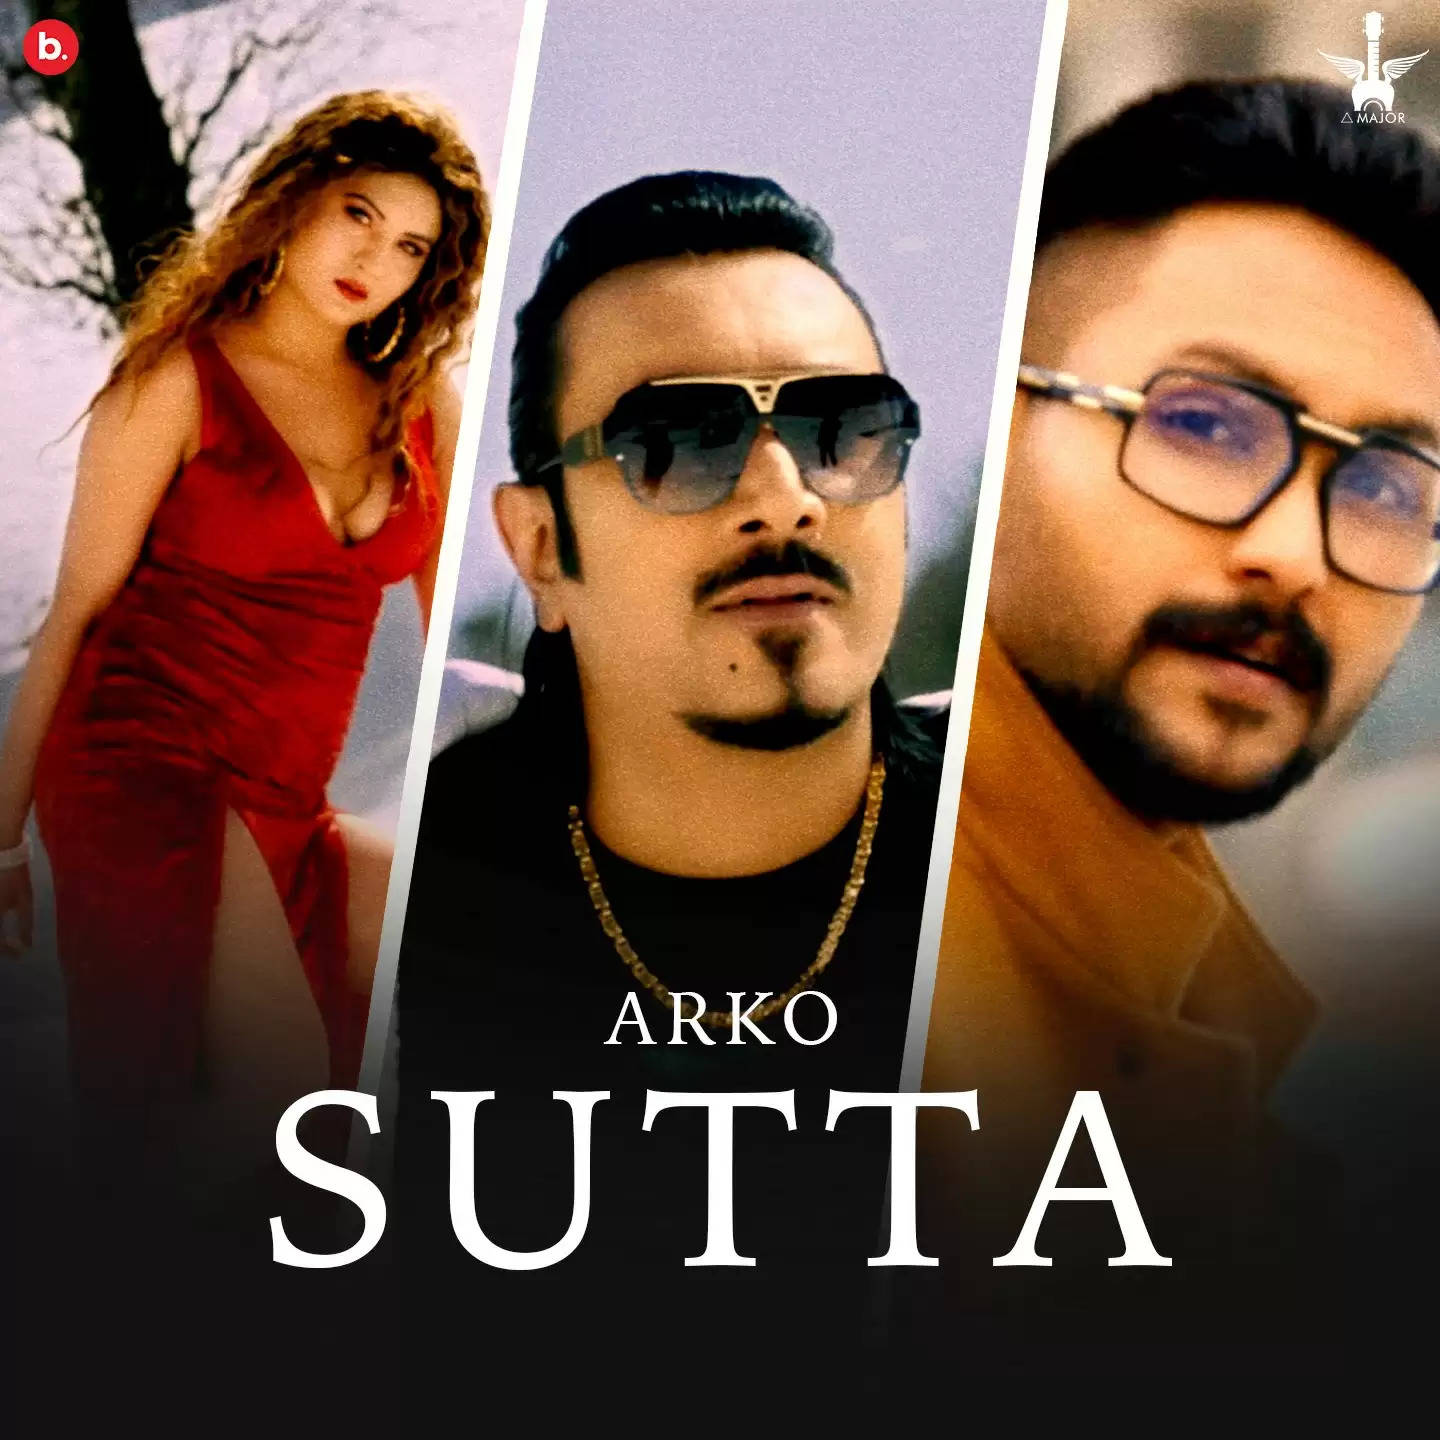 Arko announces his upcoming music single "Sutta" with Jaan Kumar Sanu! Check out the poster now